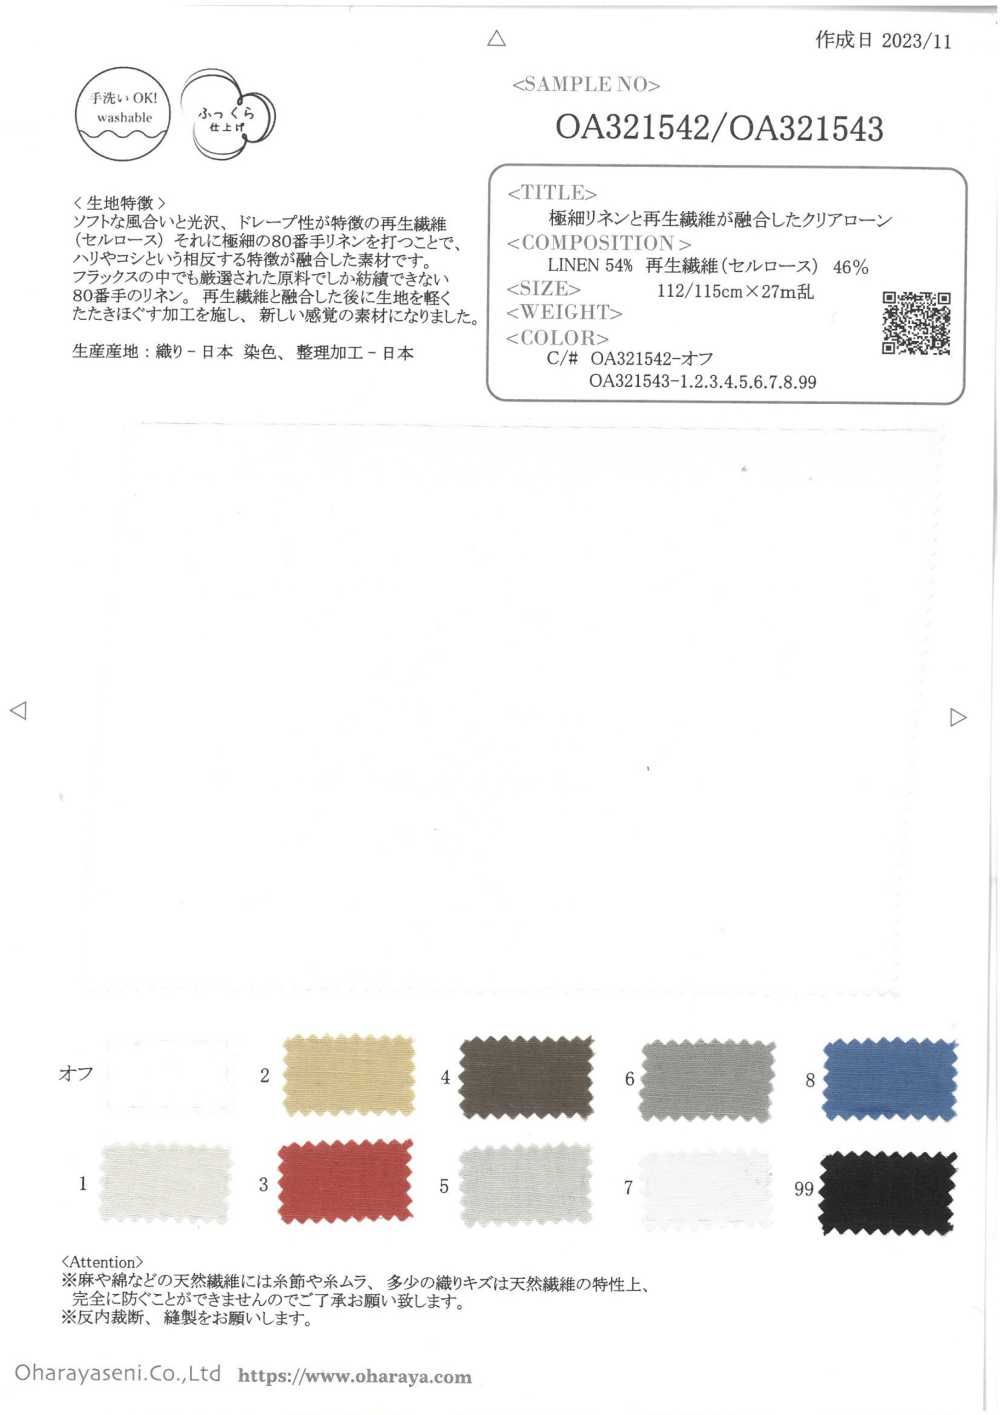 OA321543 Clear Lawn That Combines Ultra-fine Linen And Recycled Fibers[Textile / Fabric] Oharayaseni